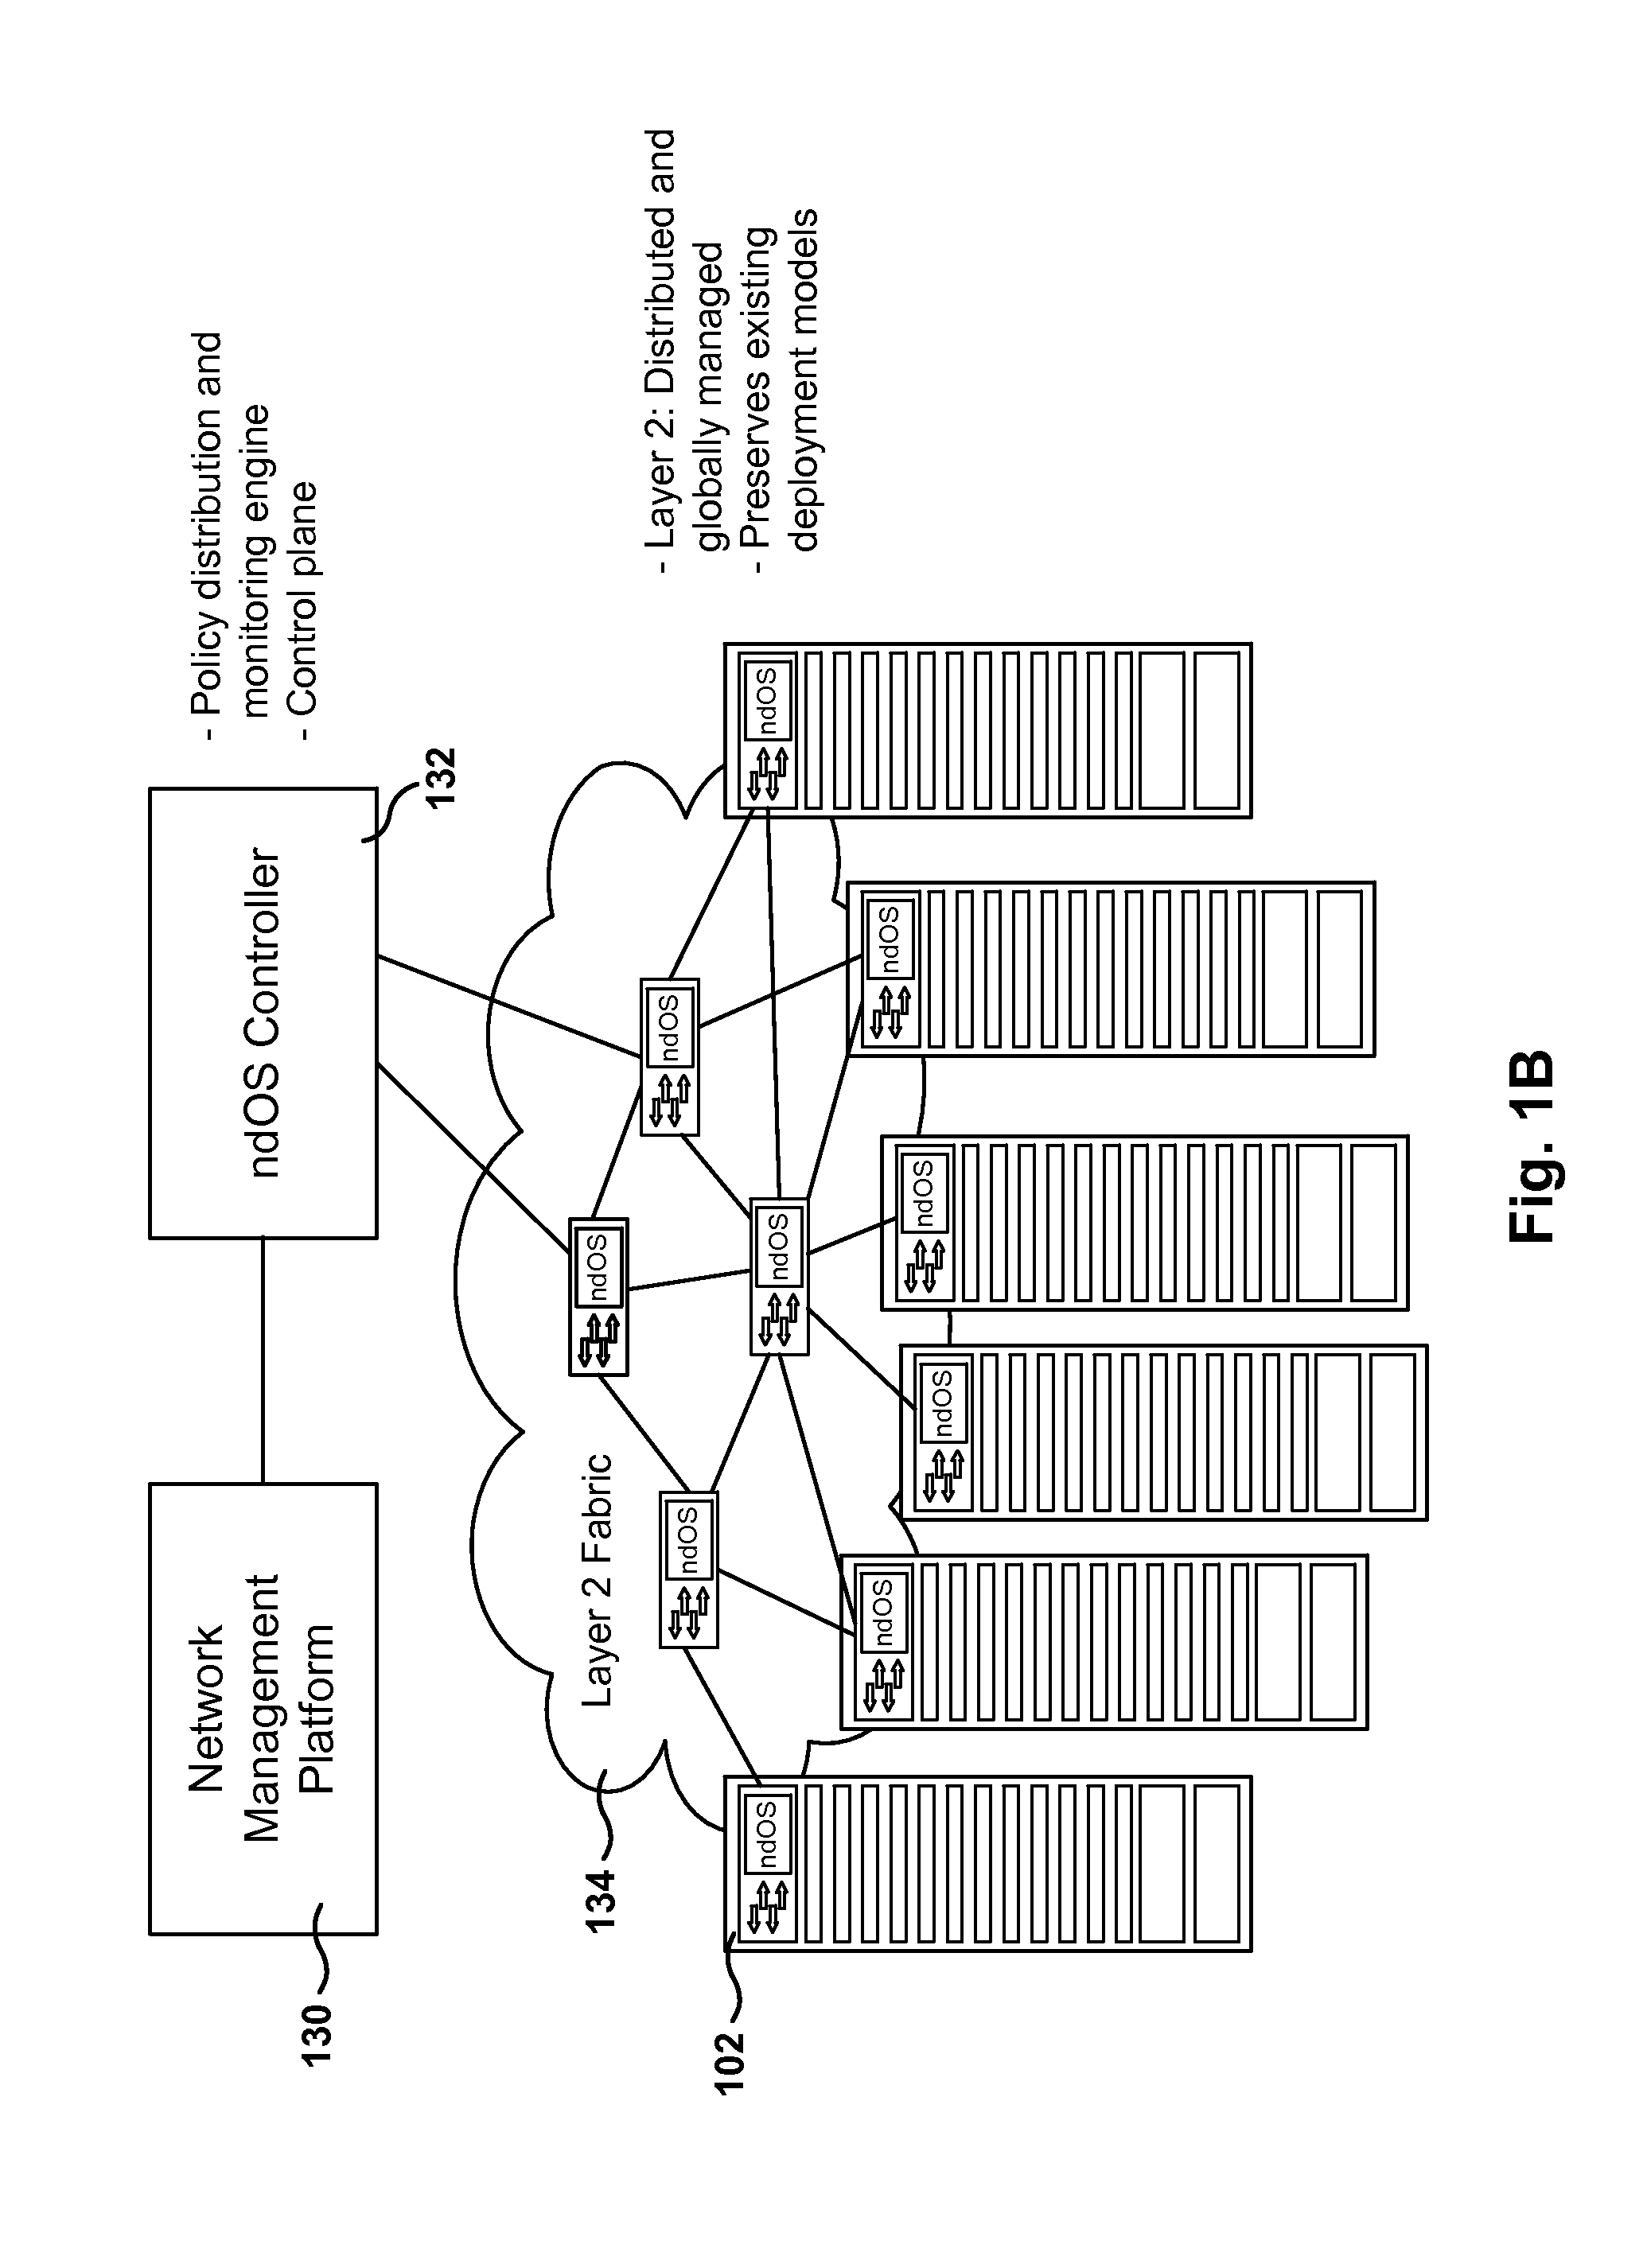 Servers, Switches, and Systems with Virtual Interface to External Network Connecting Hardware and Integrated Networking Driver